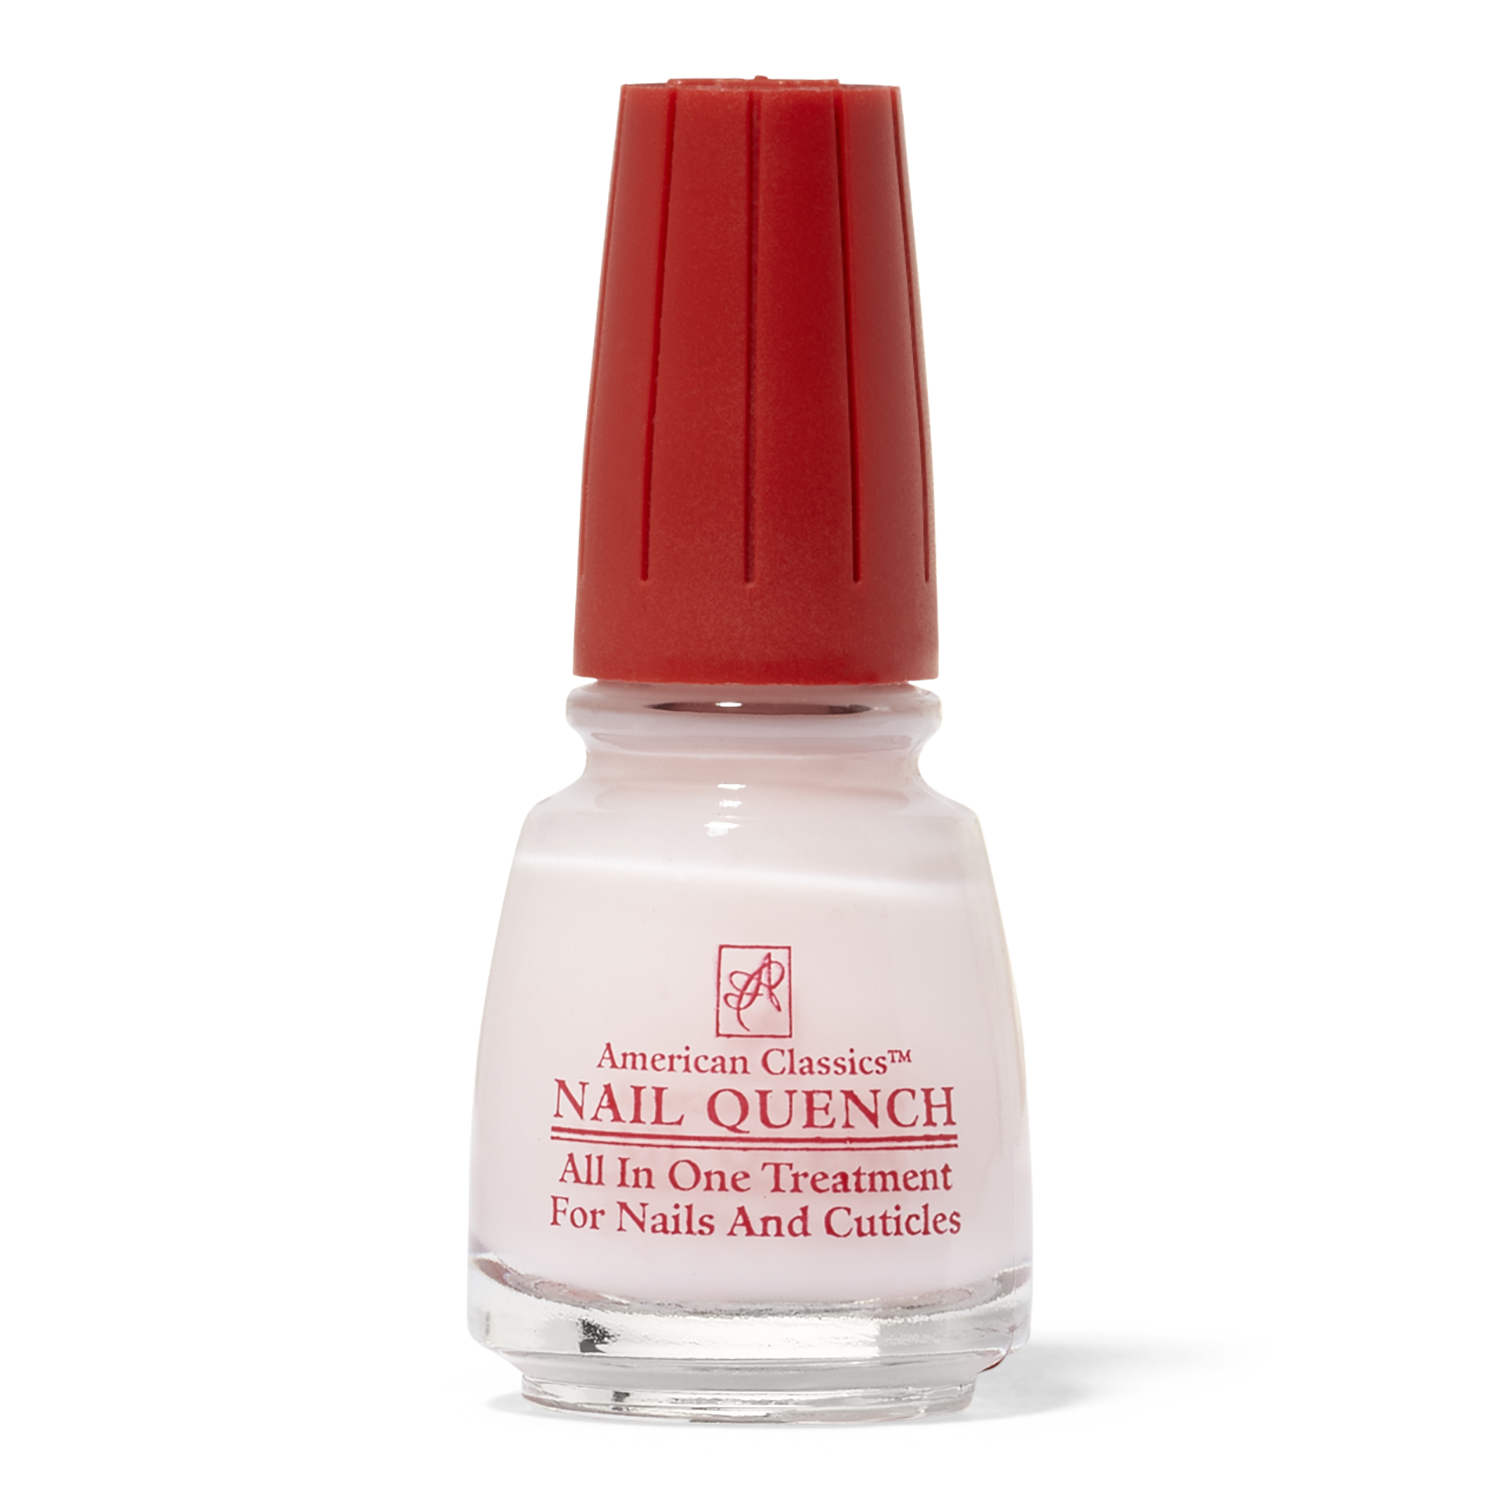 American Classics Nail Quench